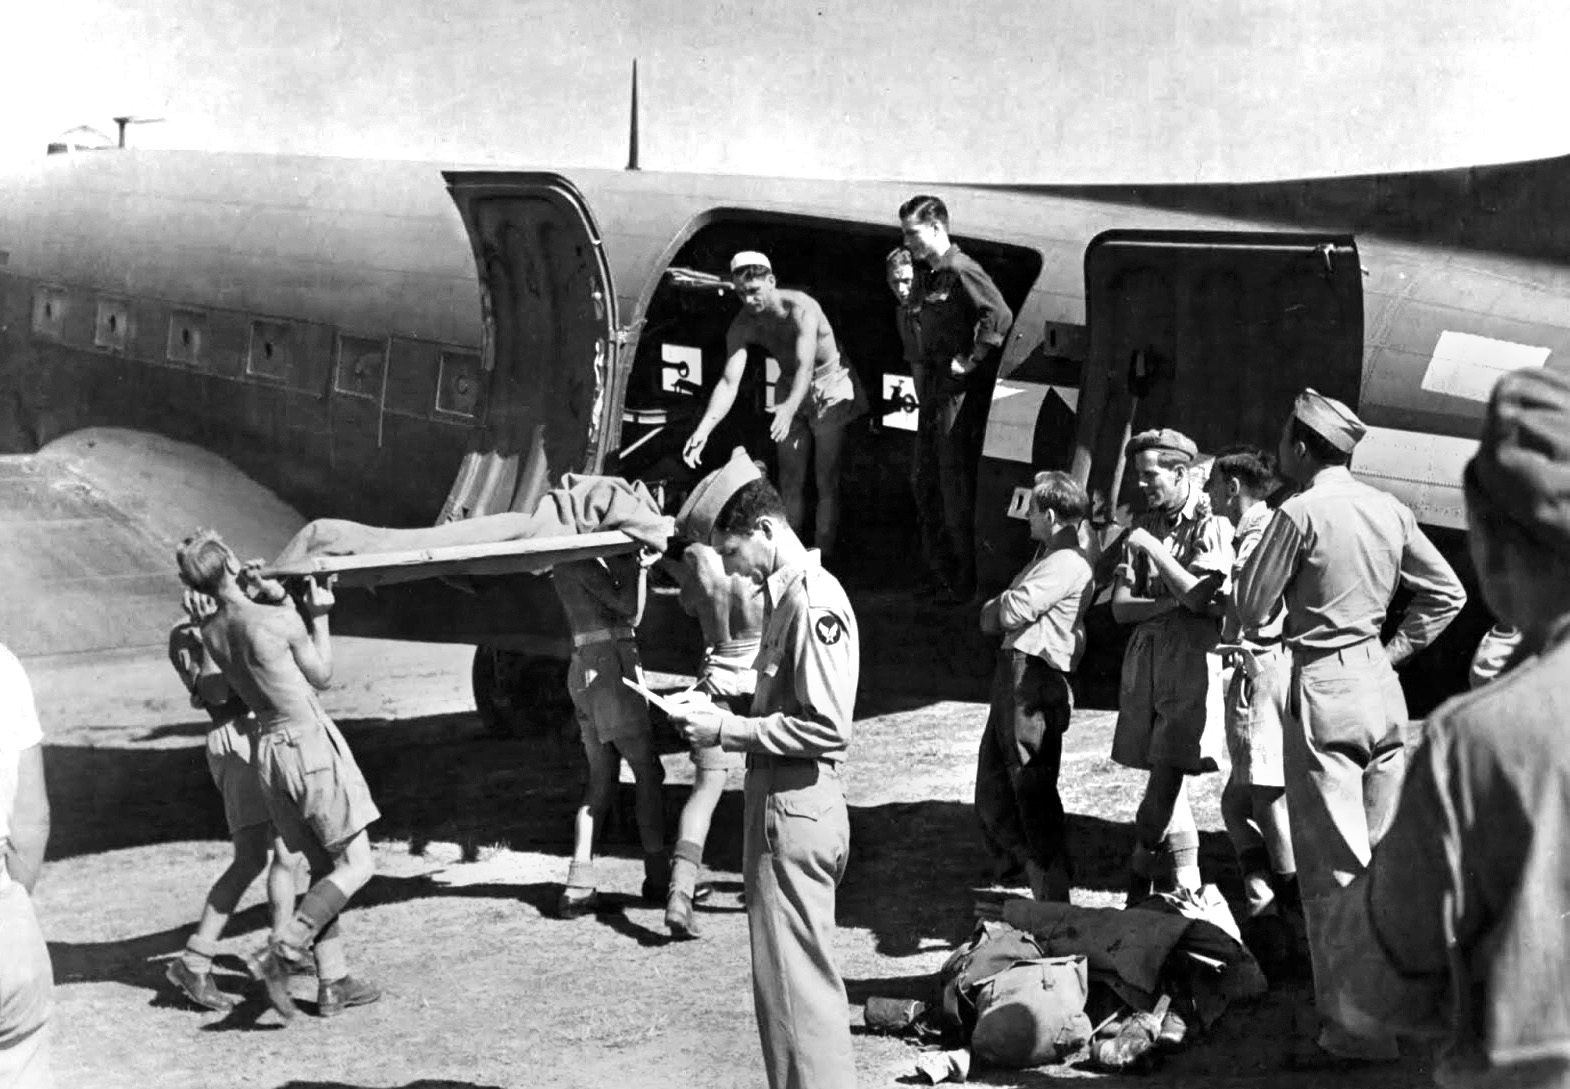 Airmen load a wounded man into a C-47 for transport at an airfield in Yugoslavia. During the course of their rescue operations, the OSS and cooperative Chetniks successfully returned 417 downed airmen from Nazi-controlled territory in Yugoslavia to Allied bases.